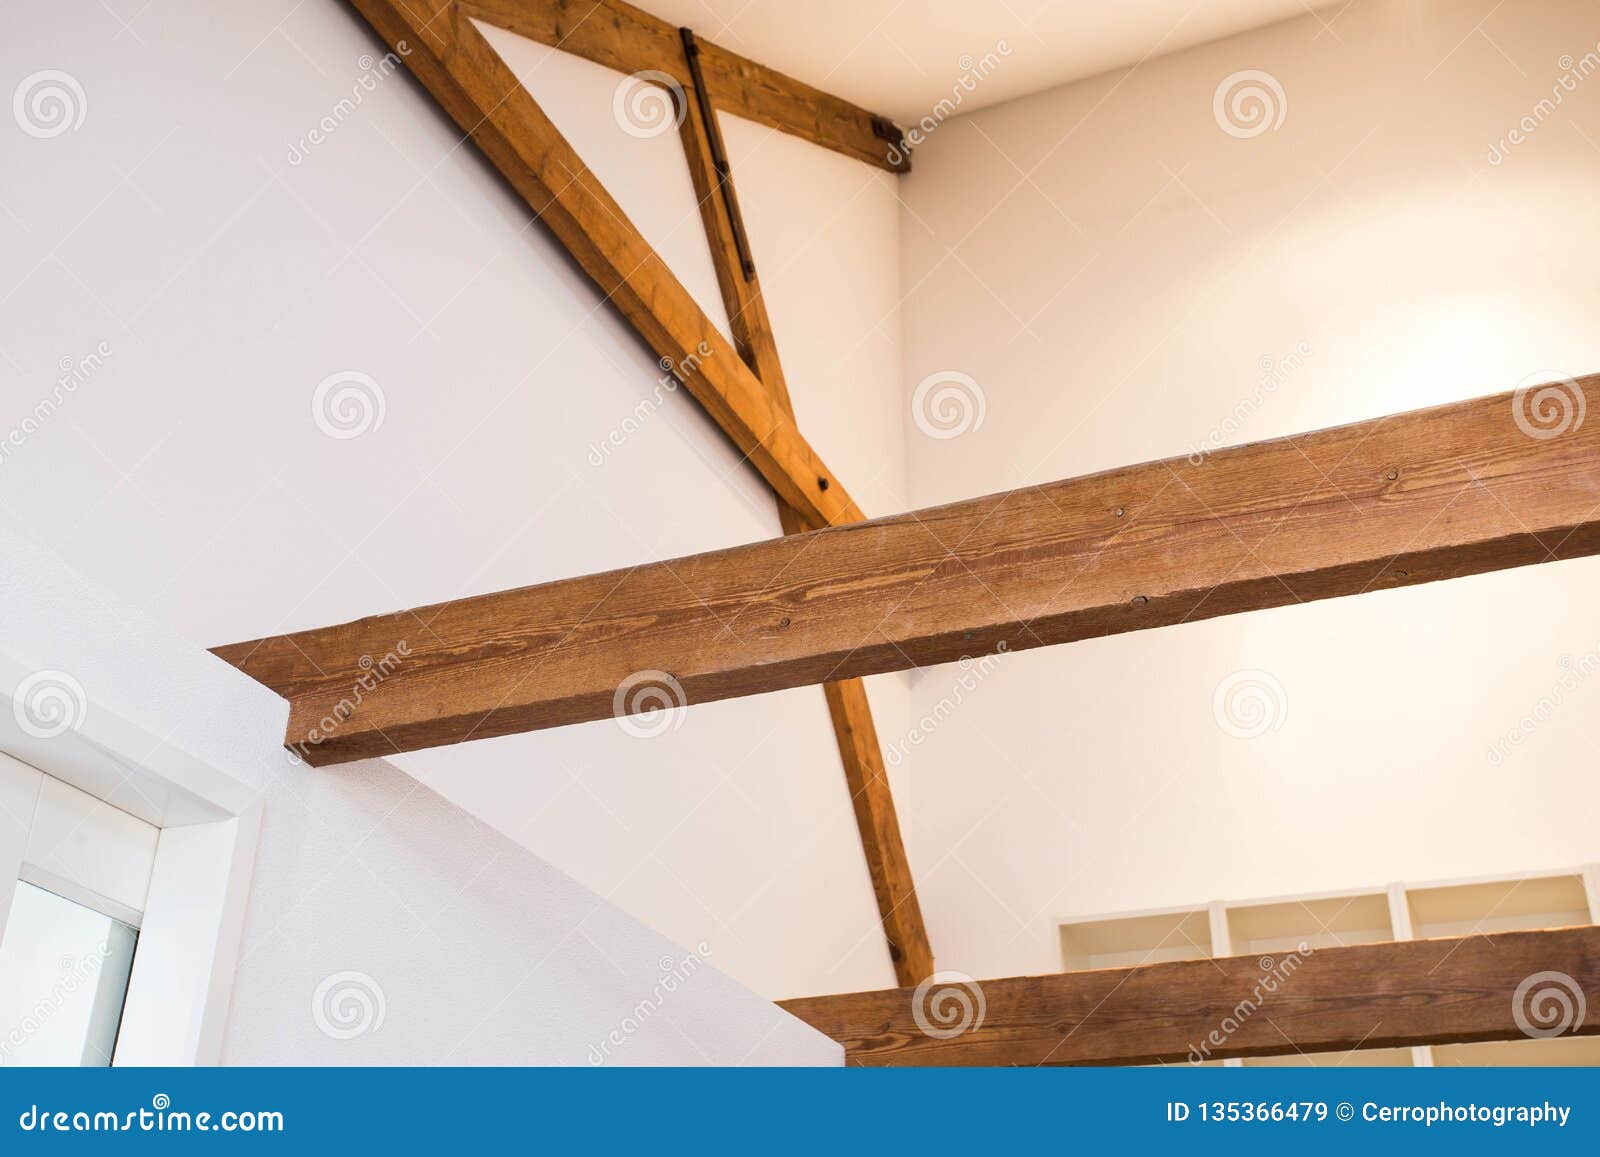 Wooden Design Wooden Beams On Ceiling As A Design Element